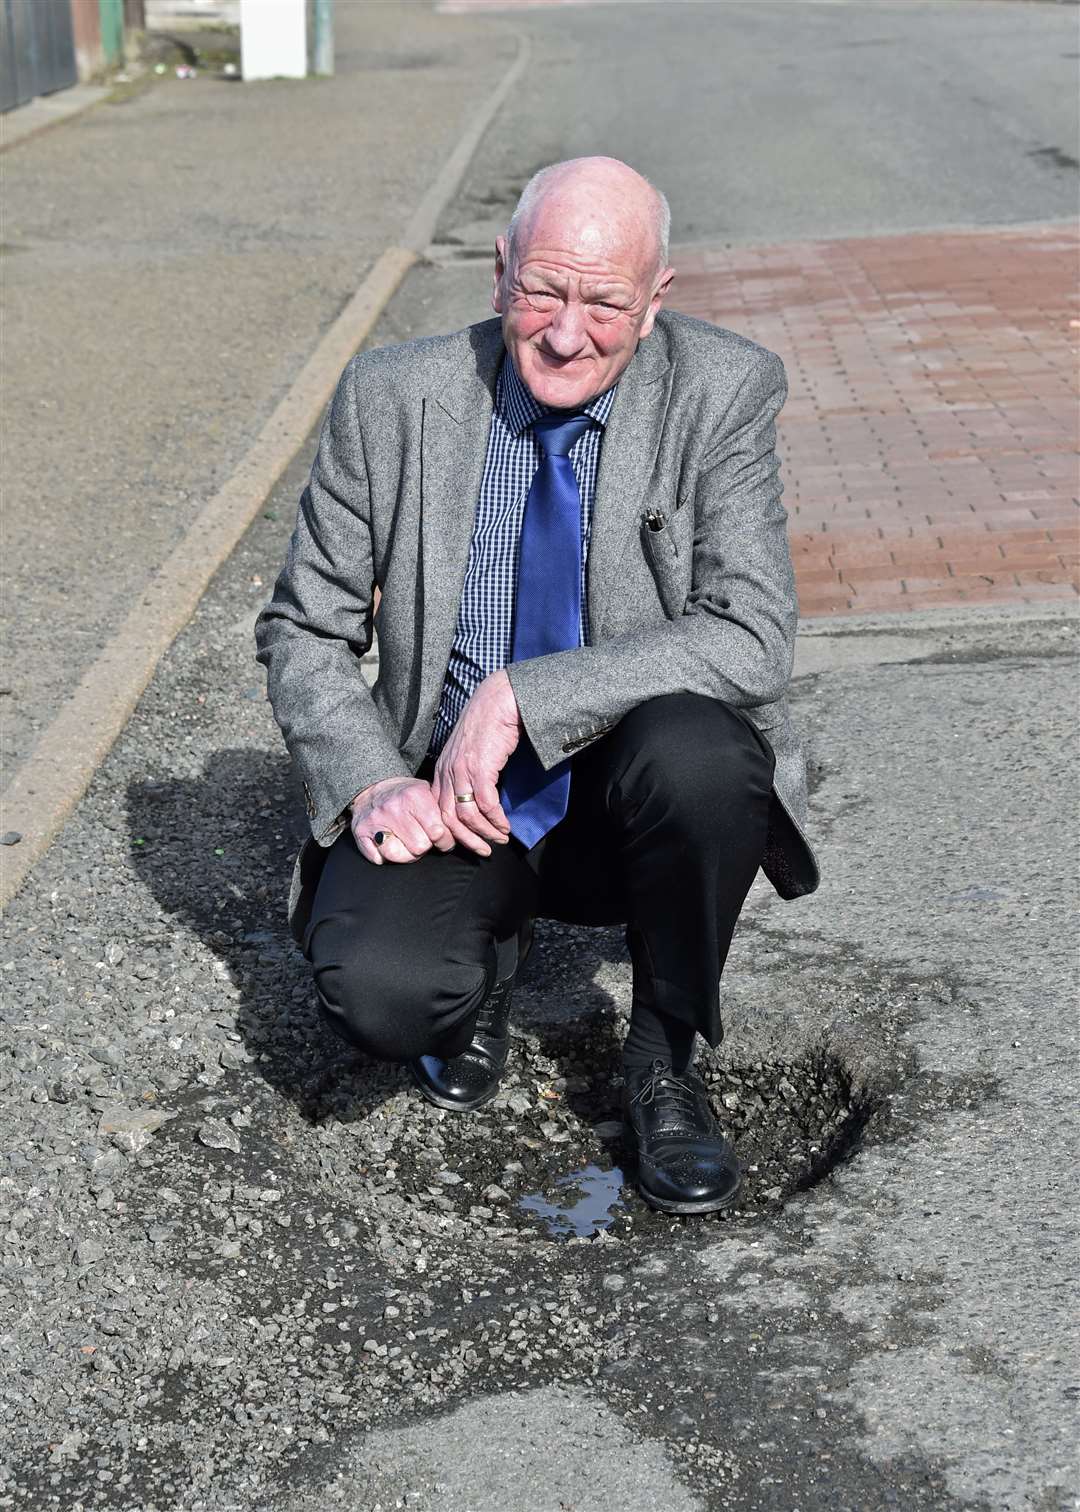 Iain Gregory says roads in Caithness face collapse if action is not taken.